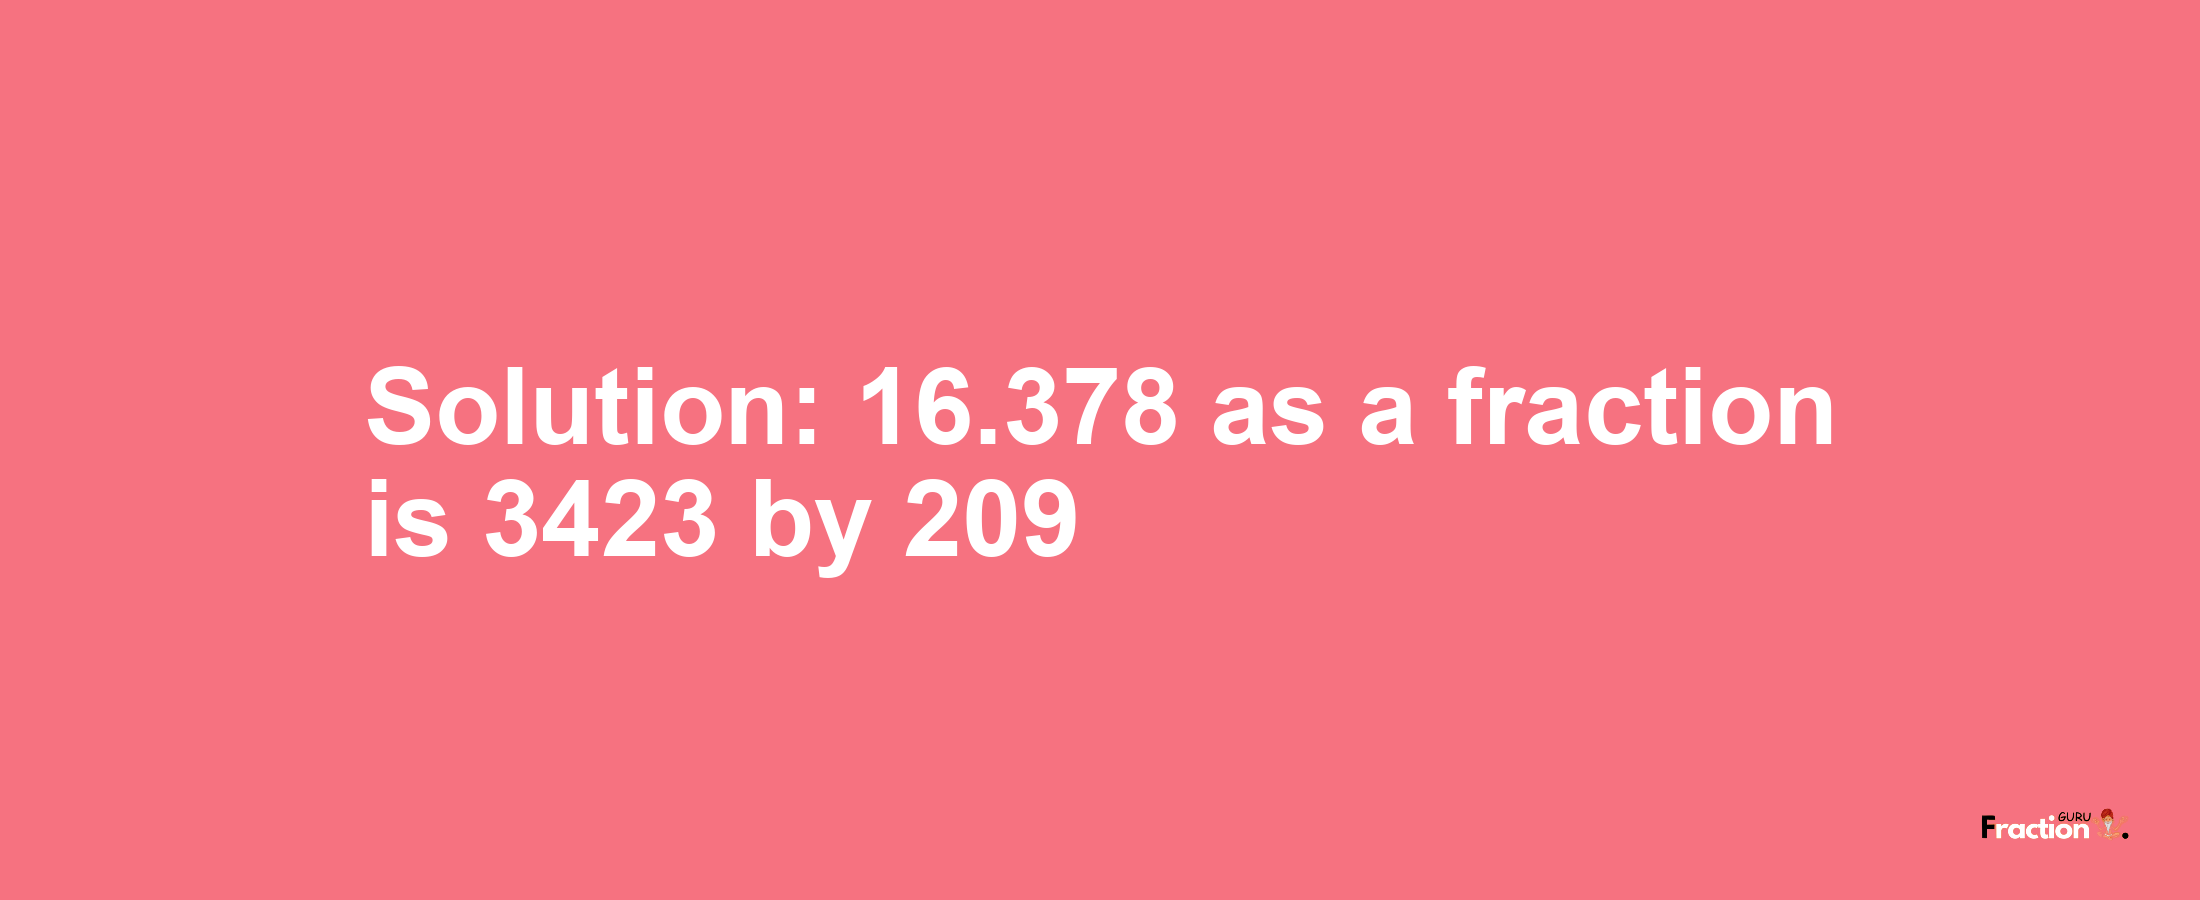 Solution:16.378 as a fraction is 3423/209